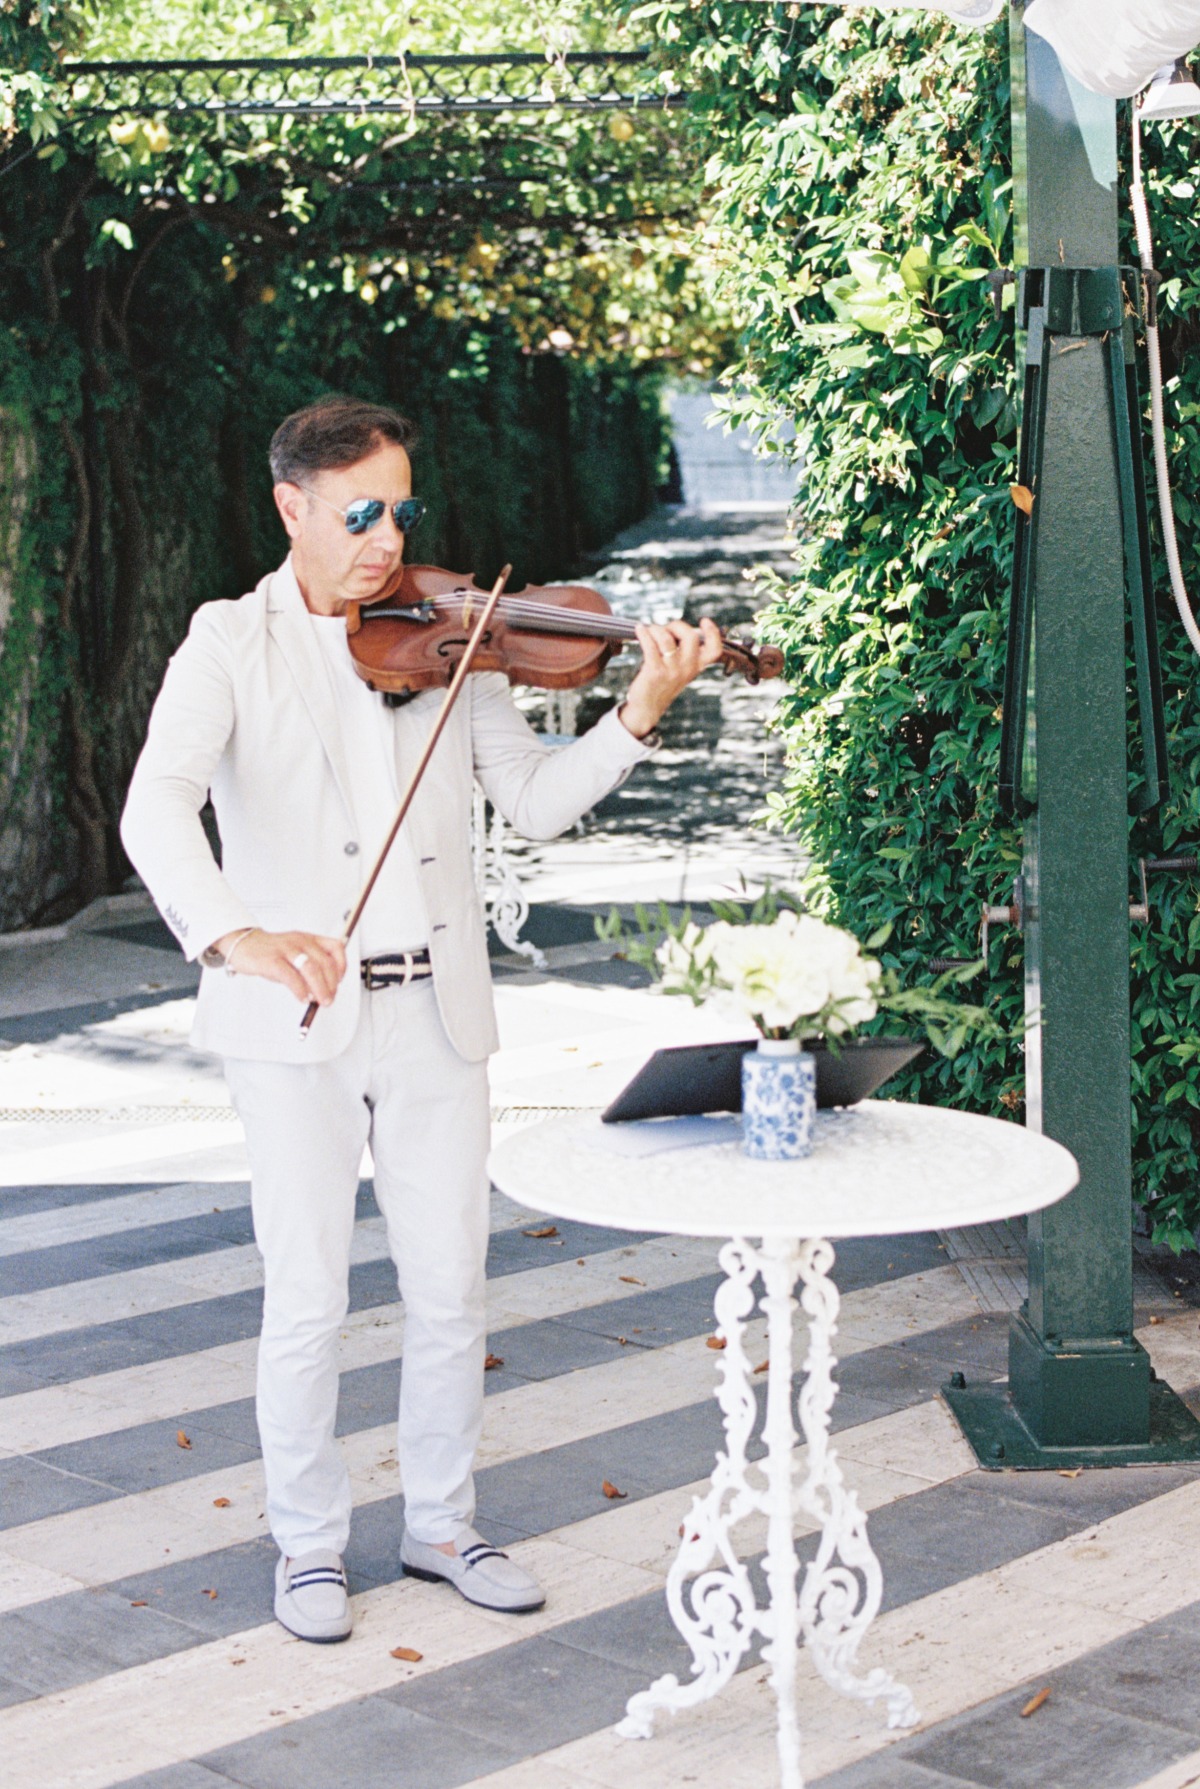 Wedding violinist in Italy 